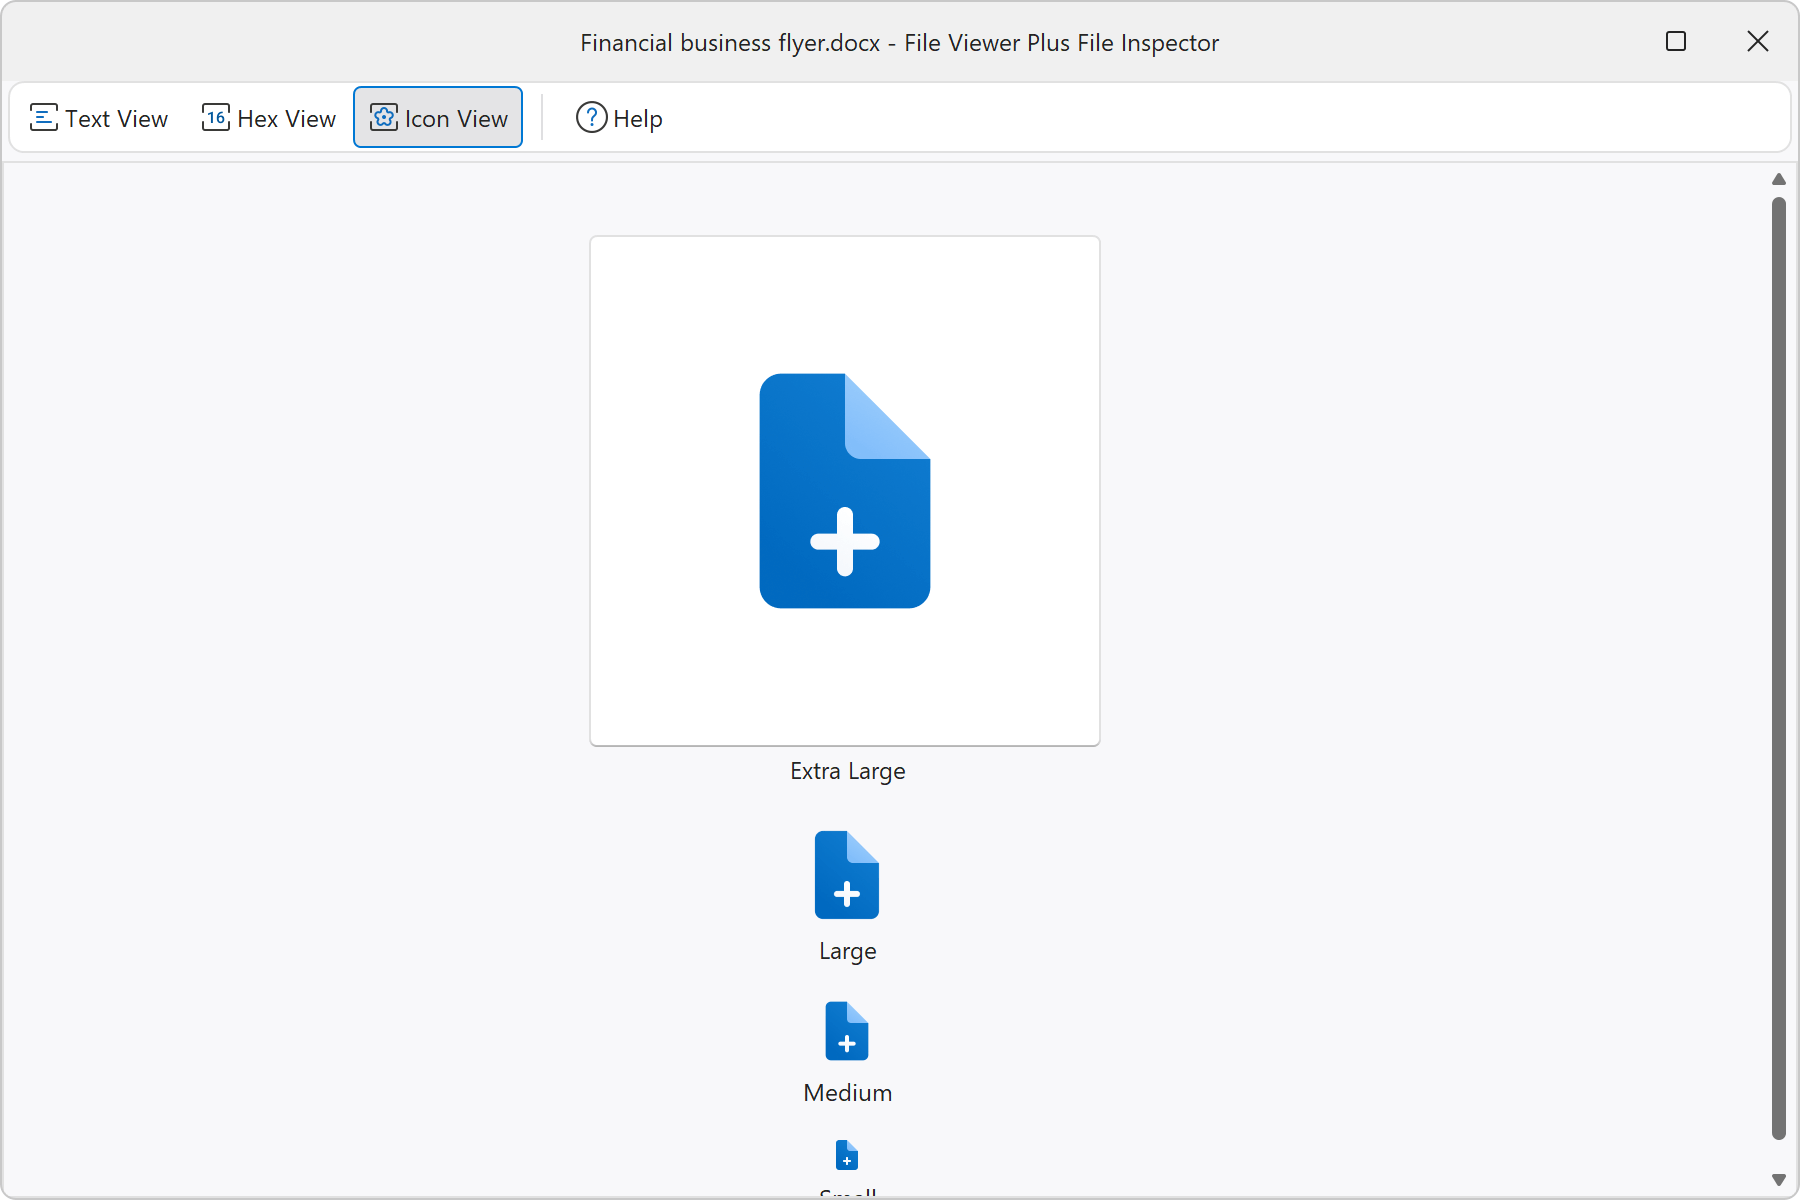 File Viewer Plus Icon View